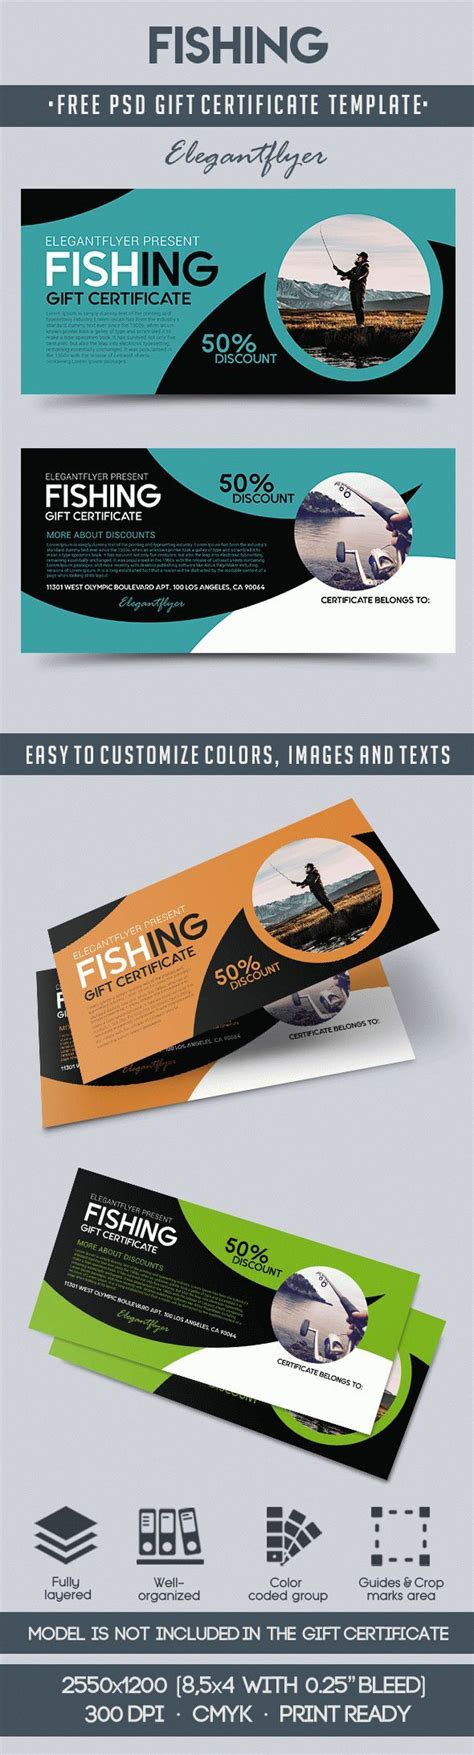 fishing gift certificate template printable word searches